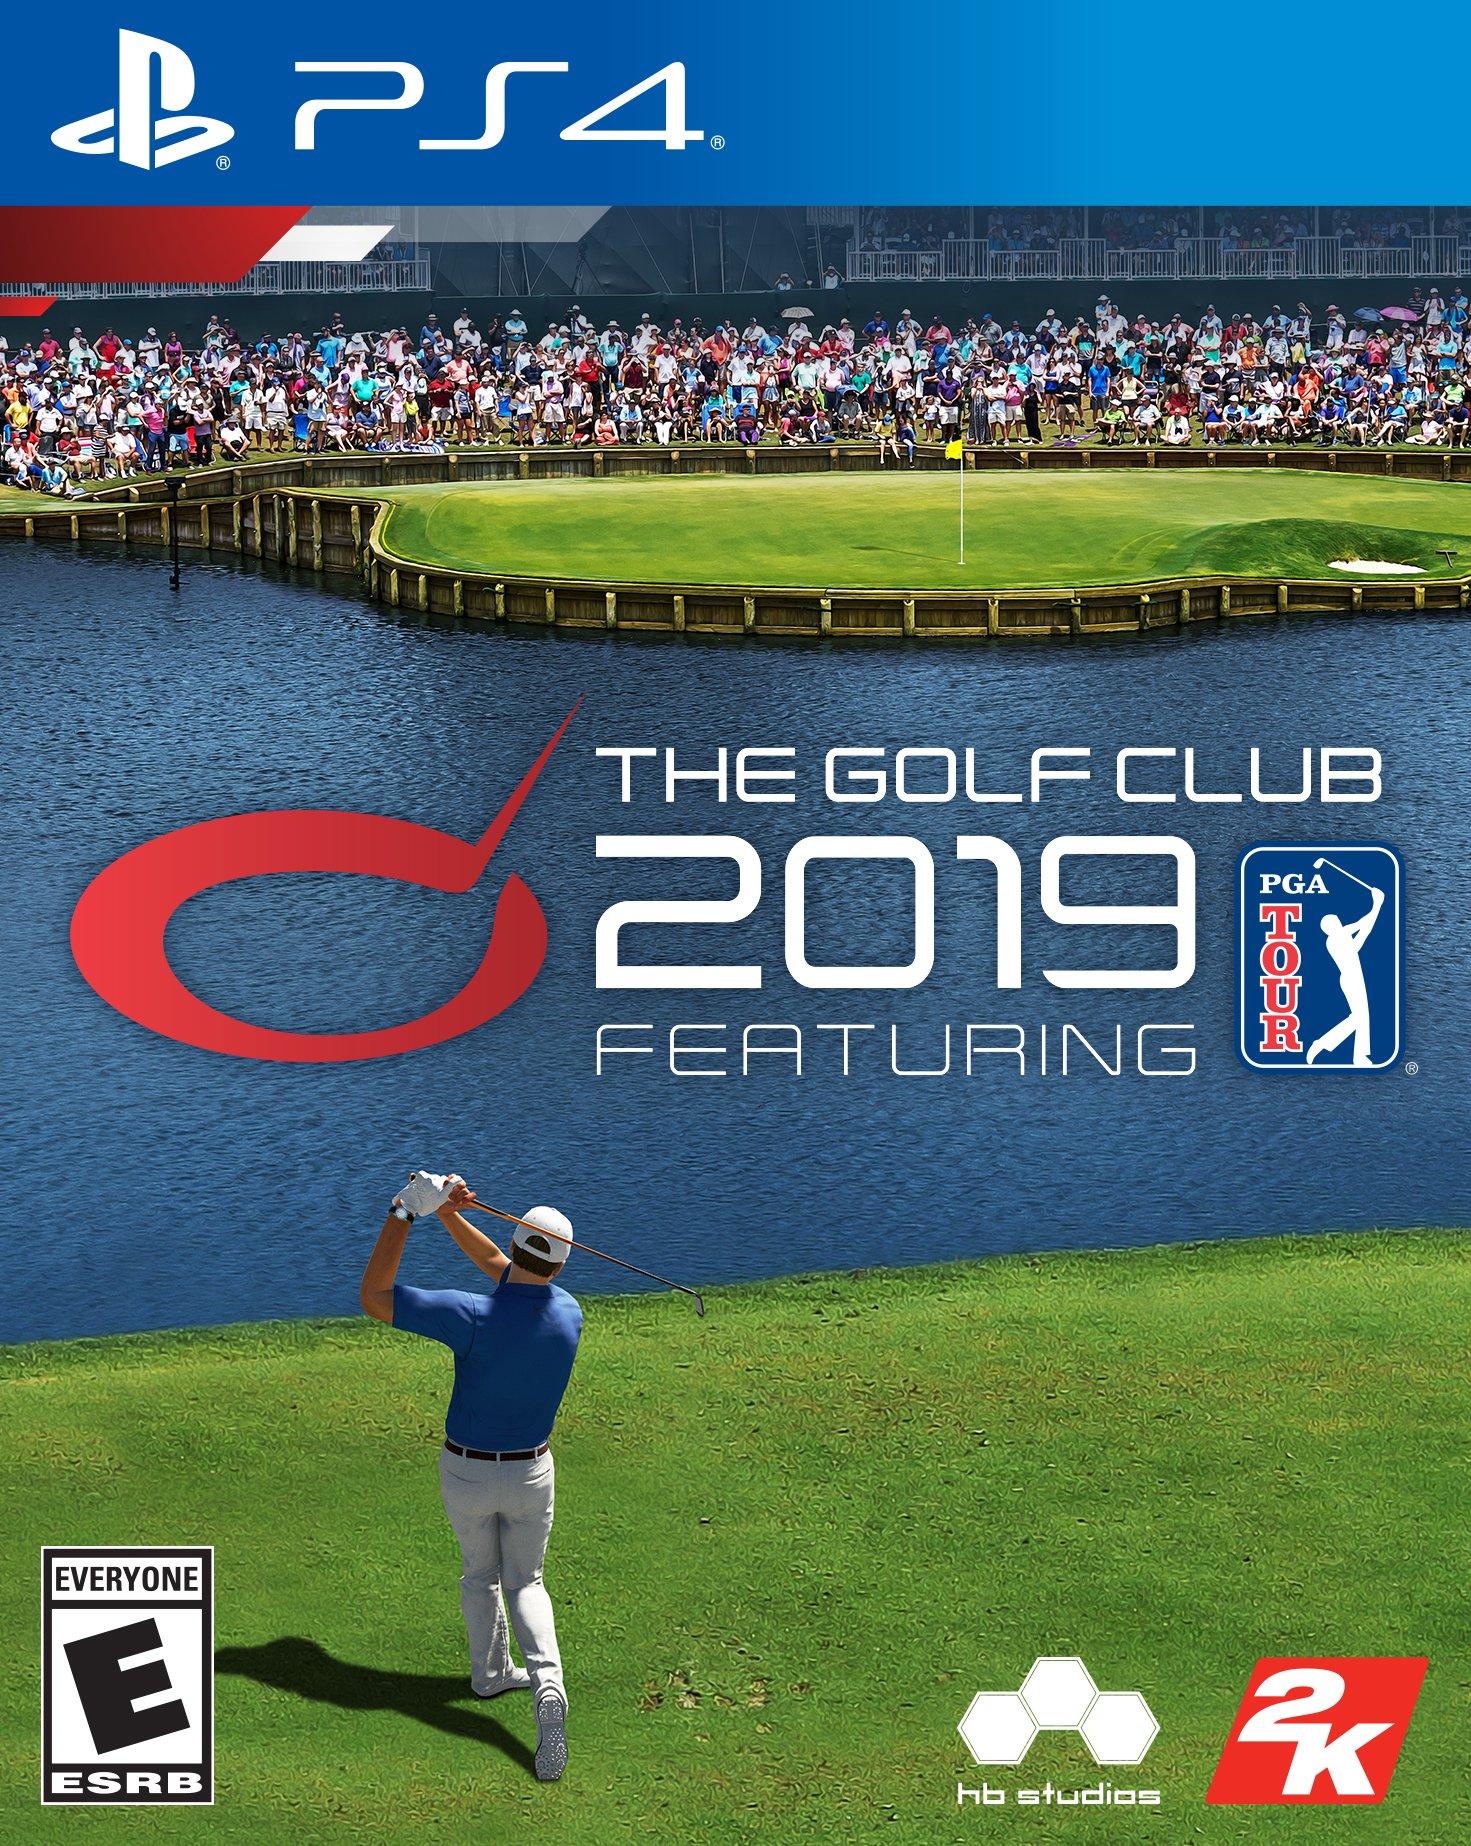 the golf club discount code ps4